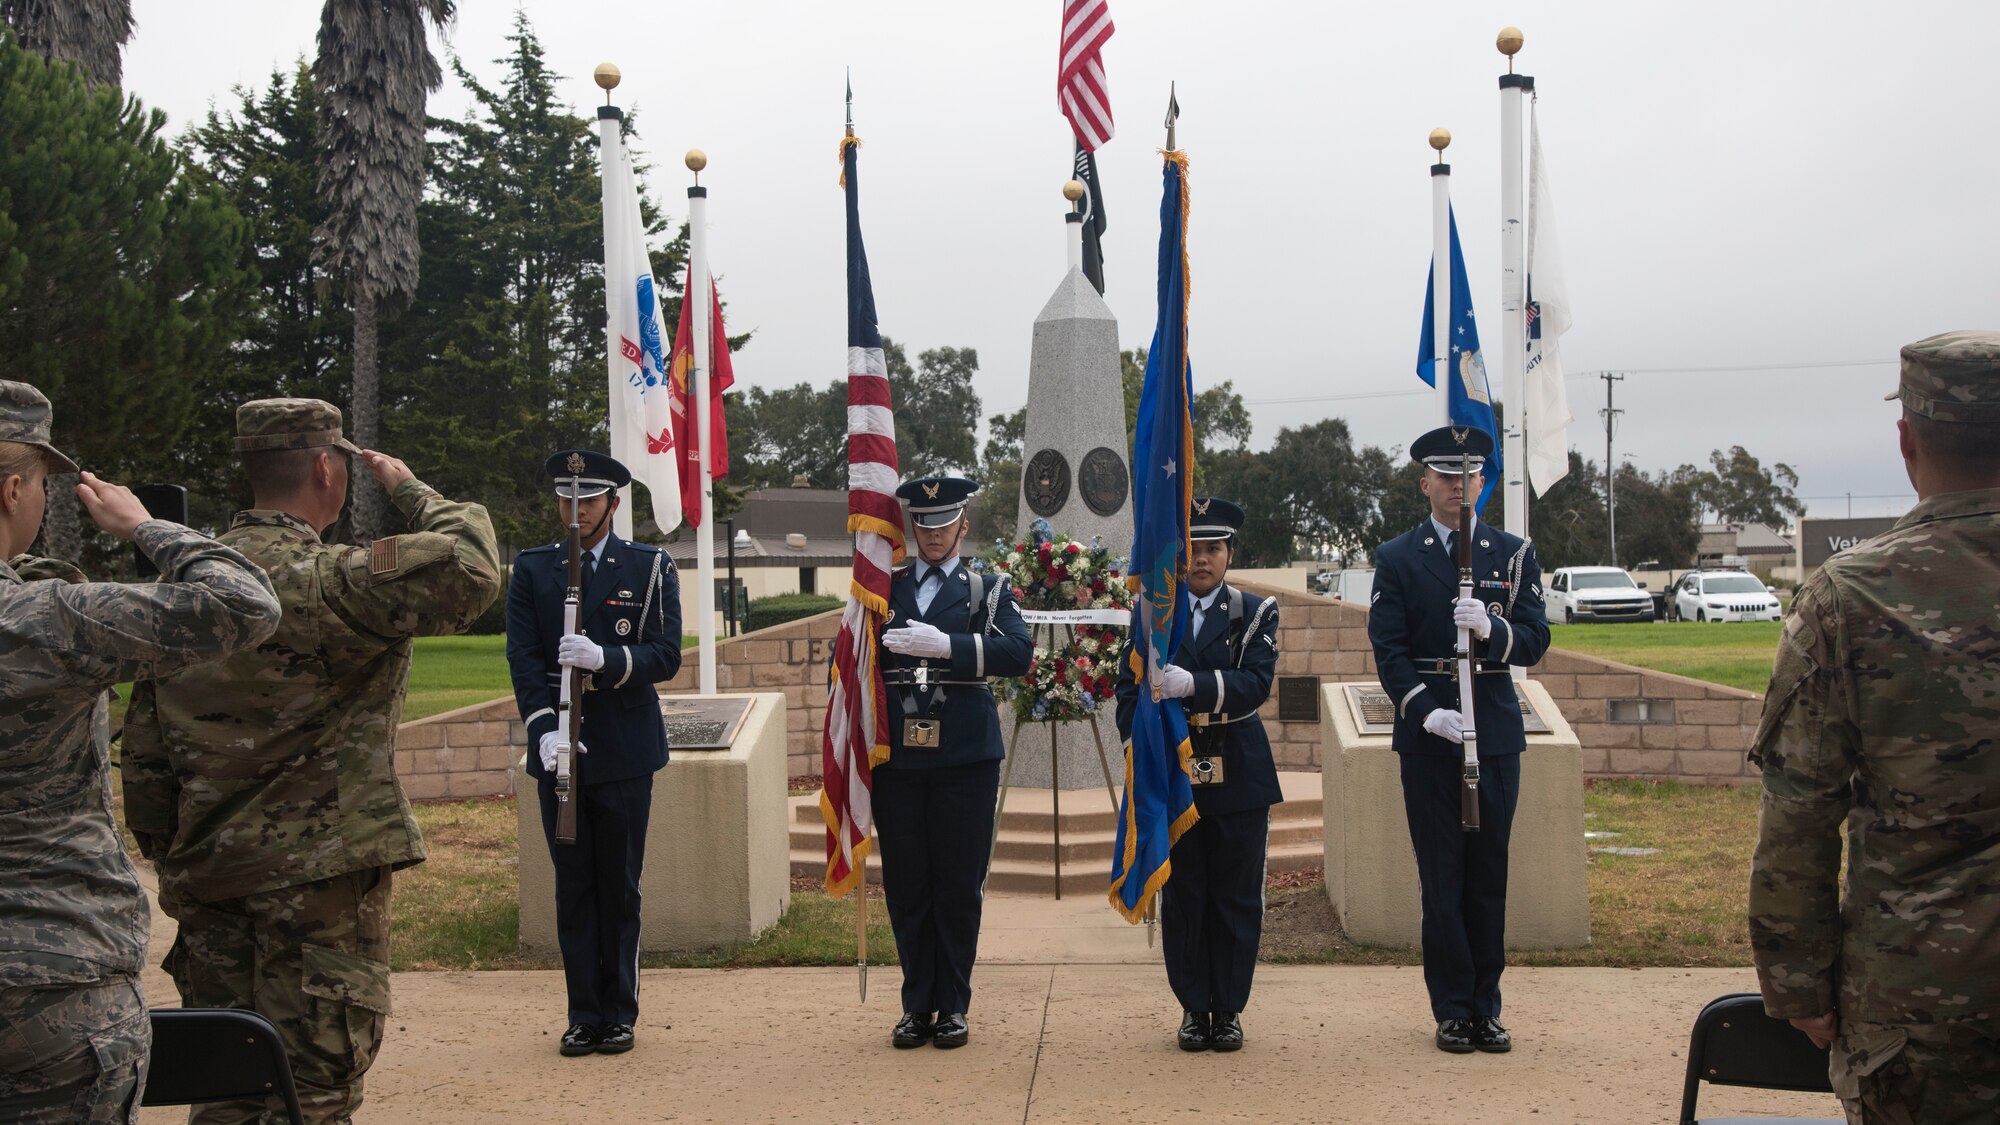 Members of Vandenberg Air Force Base Honor Guard present the colors during the POW/MIA Opening Ceremony Sept. 16, 2019, at Vandenberg AFB, Calif.